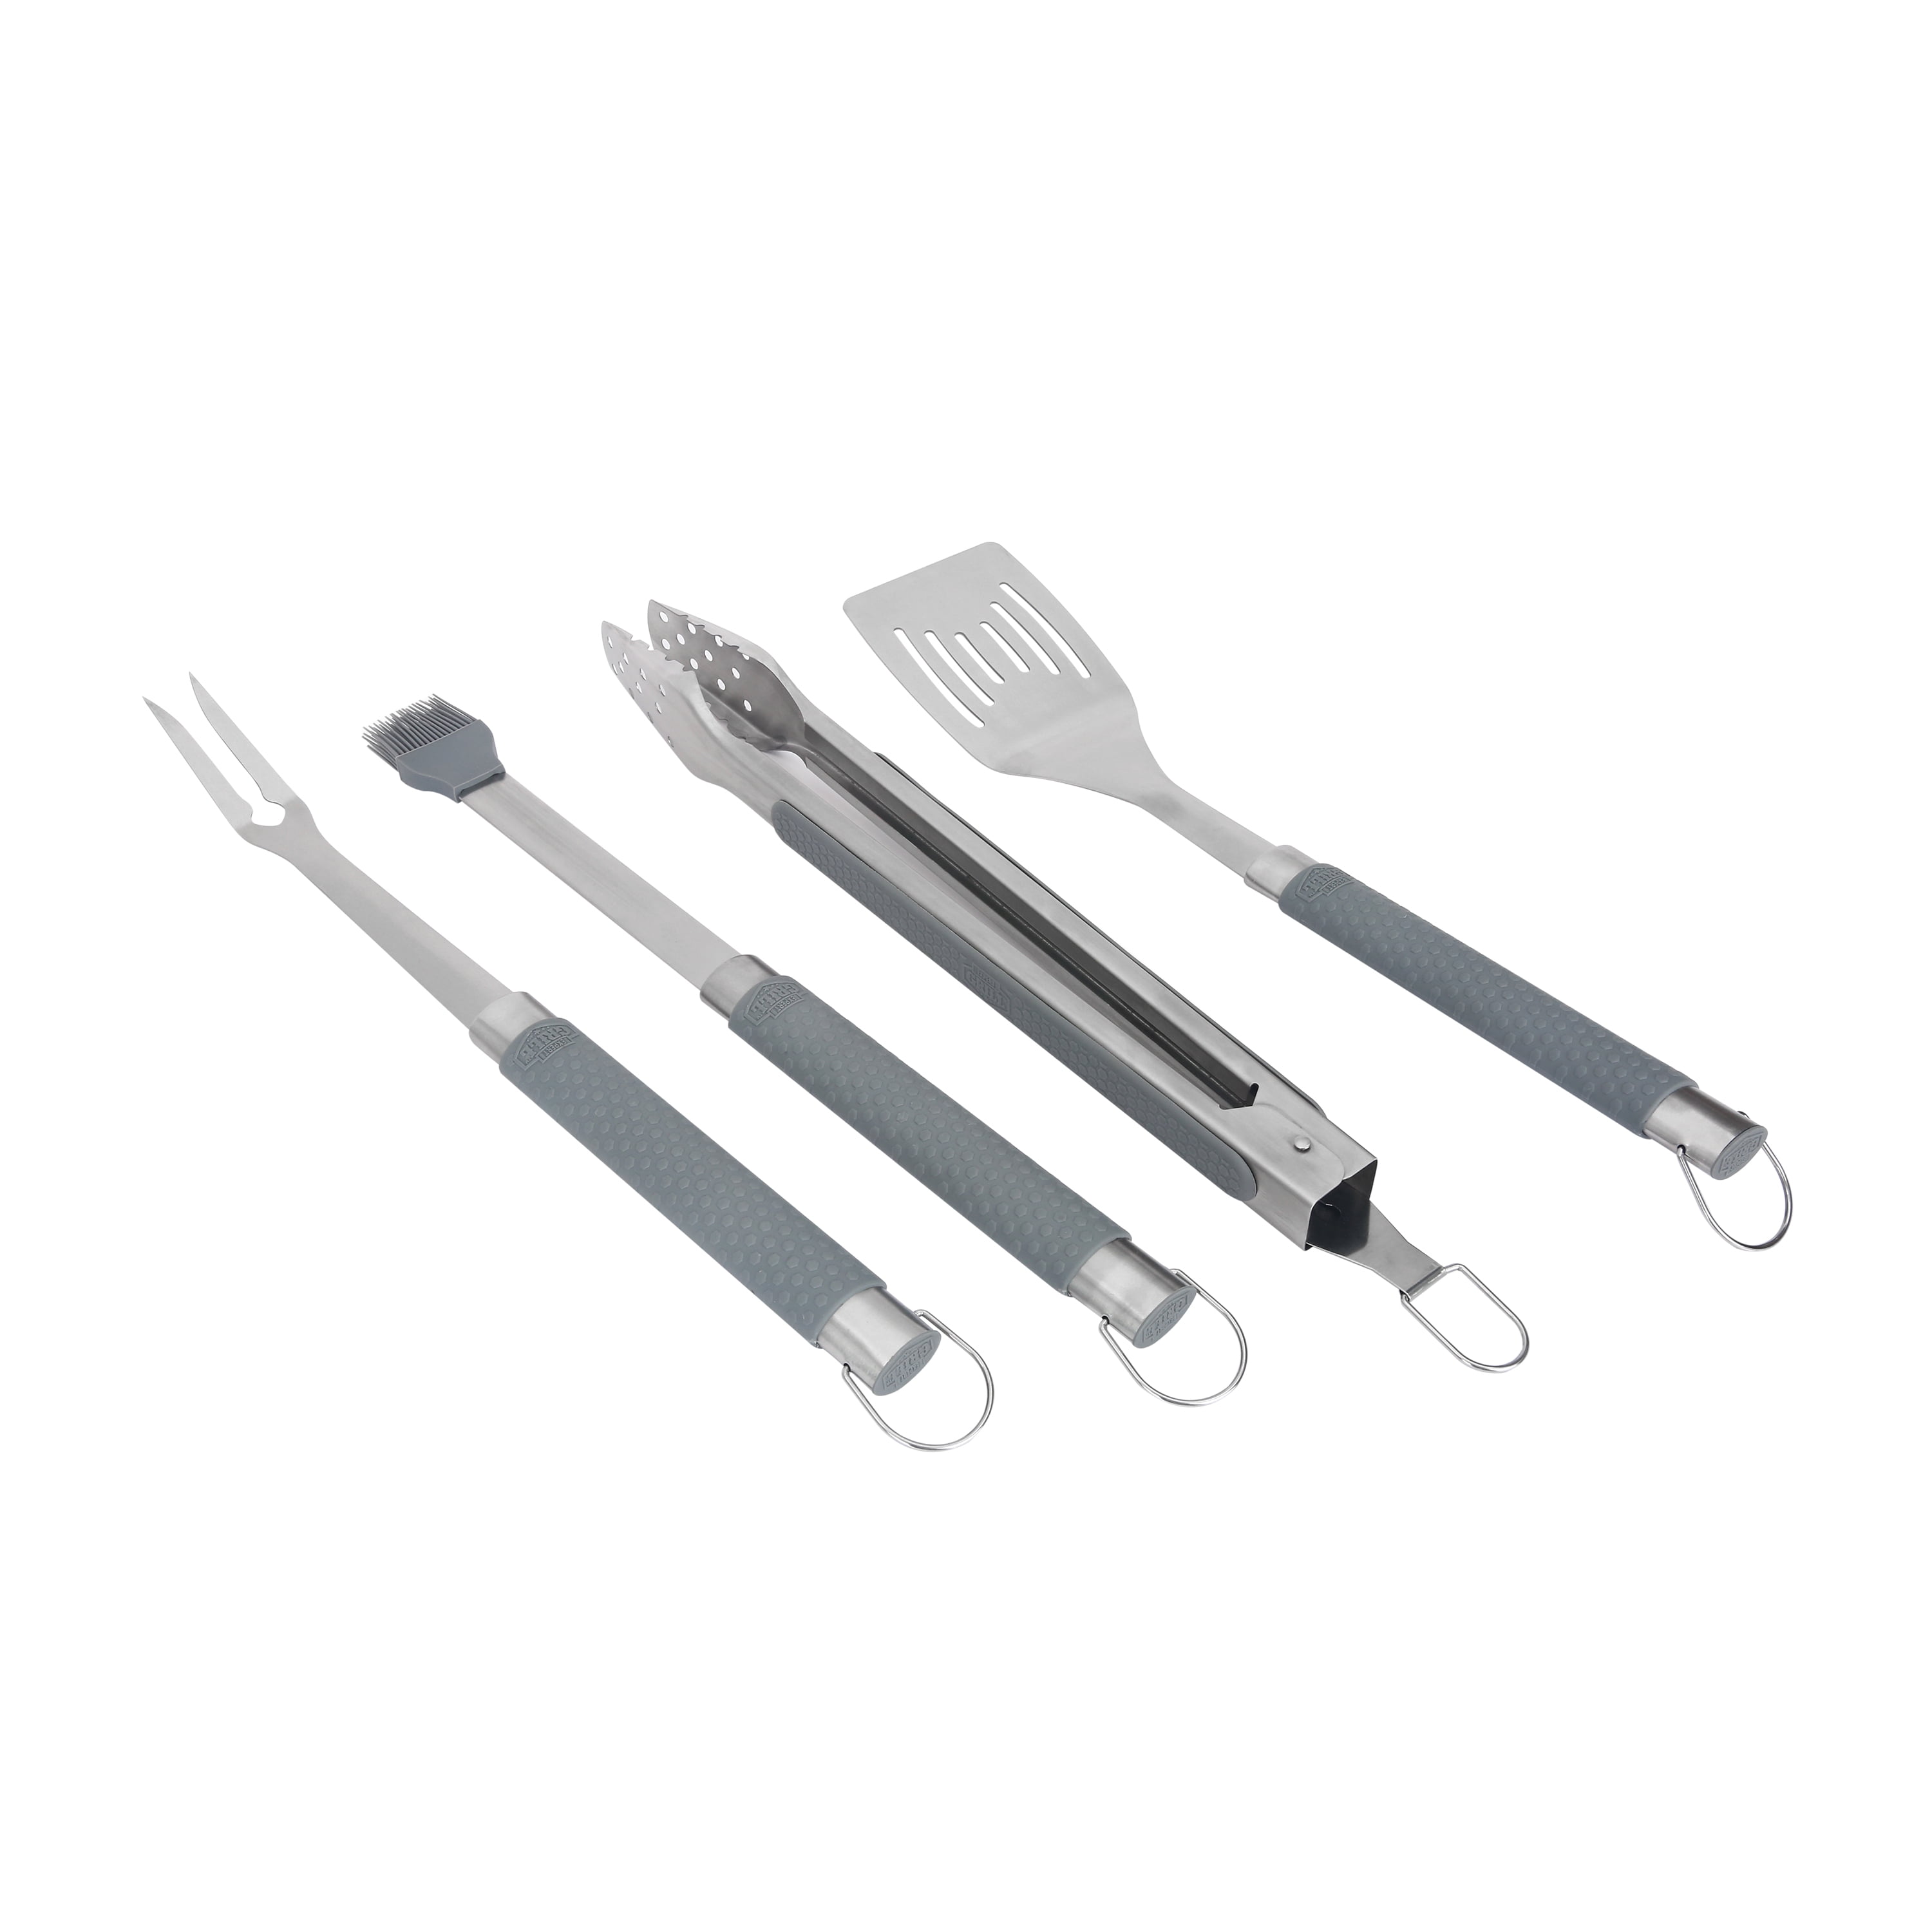 4Piece BBQ Grill Tools Set Stainless Steel Barbecue Accessories Outdoor Utensil 